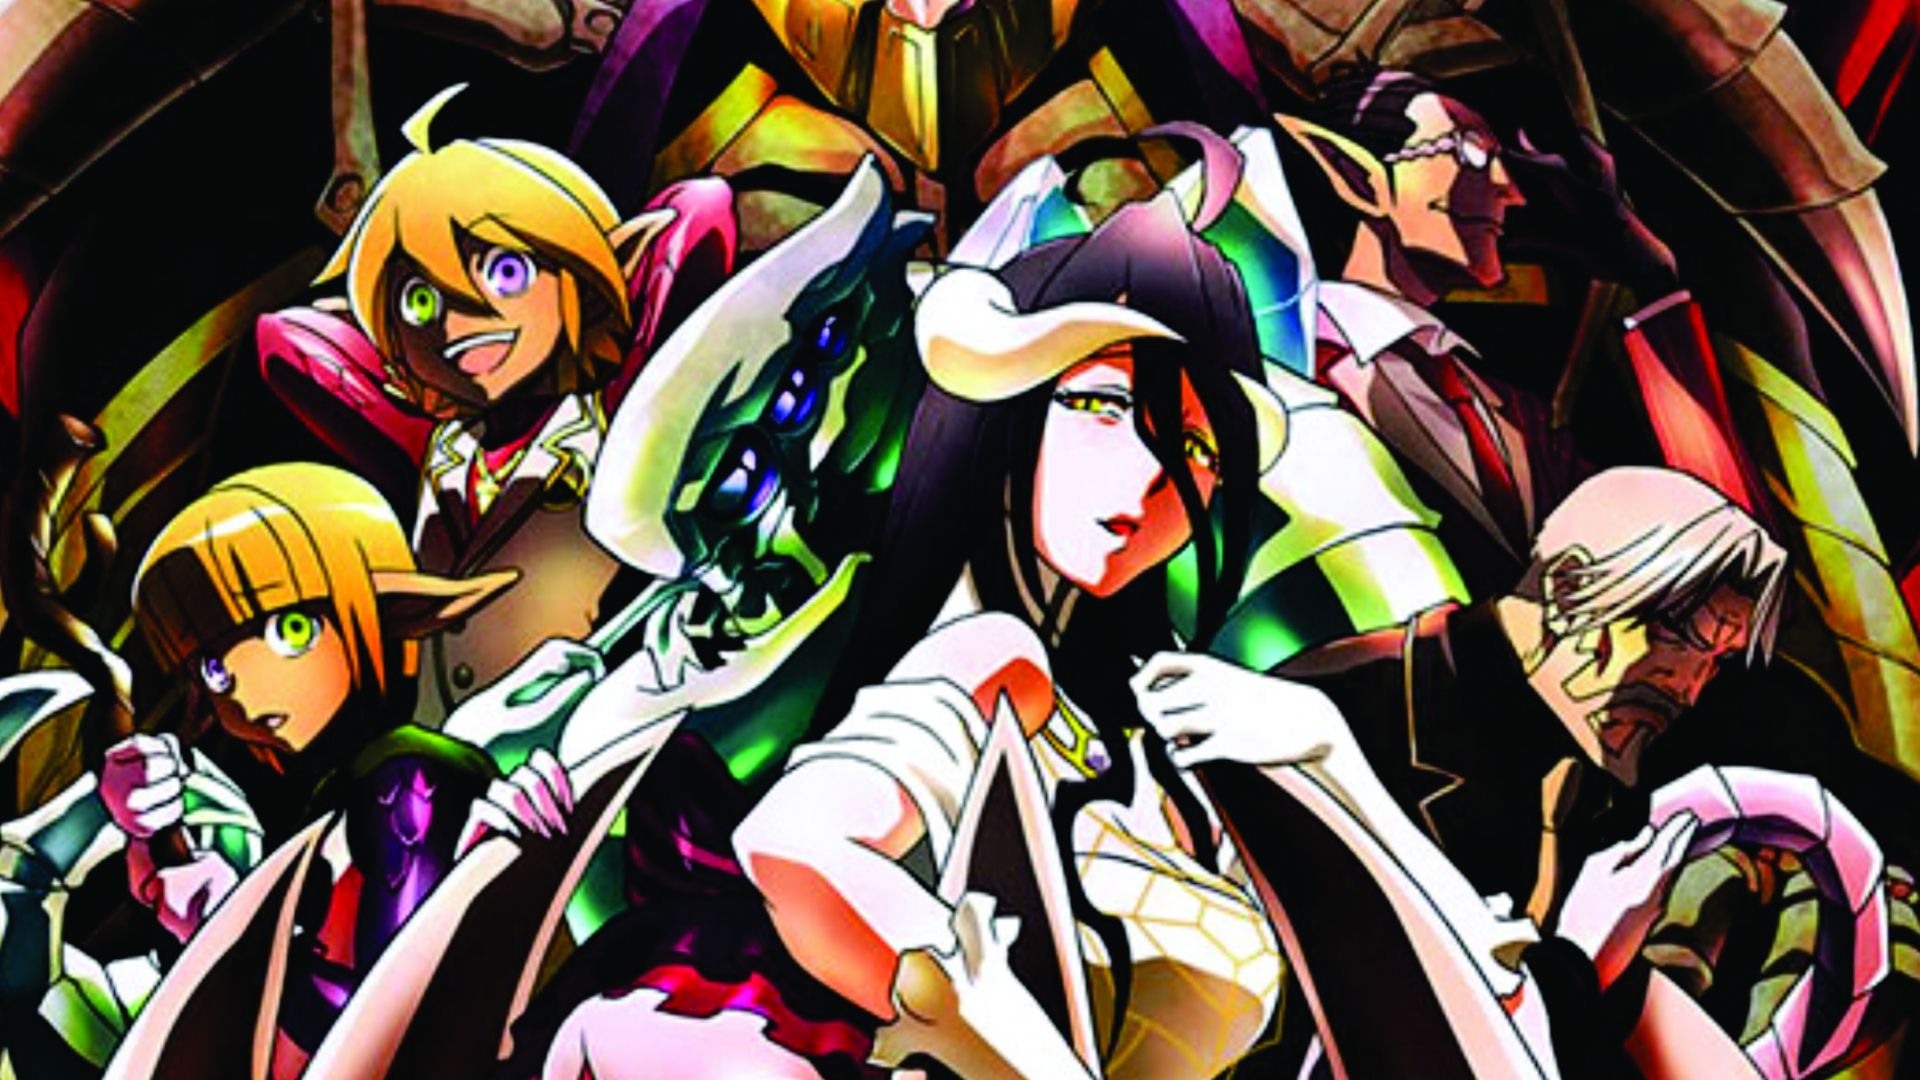 Free download Overlord Anime Full HD Wallpaper 7942 Amazing